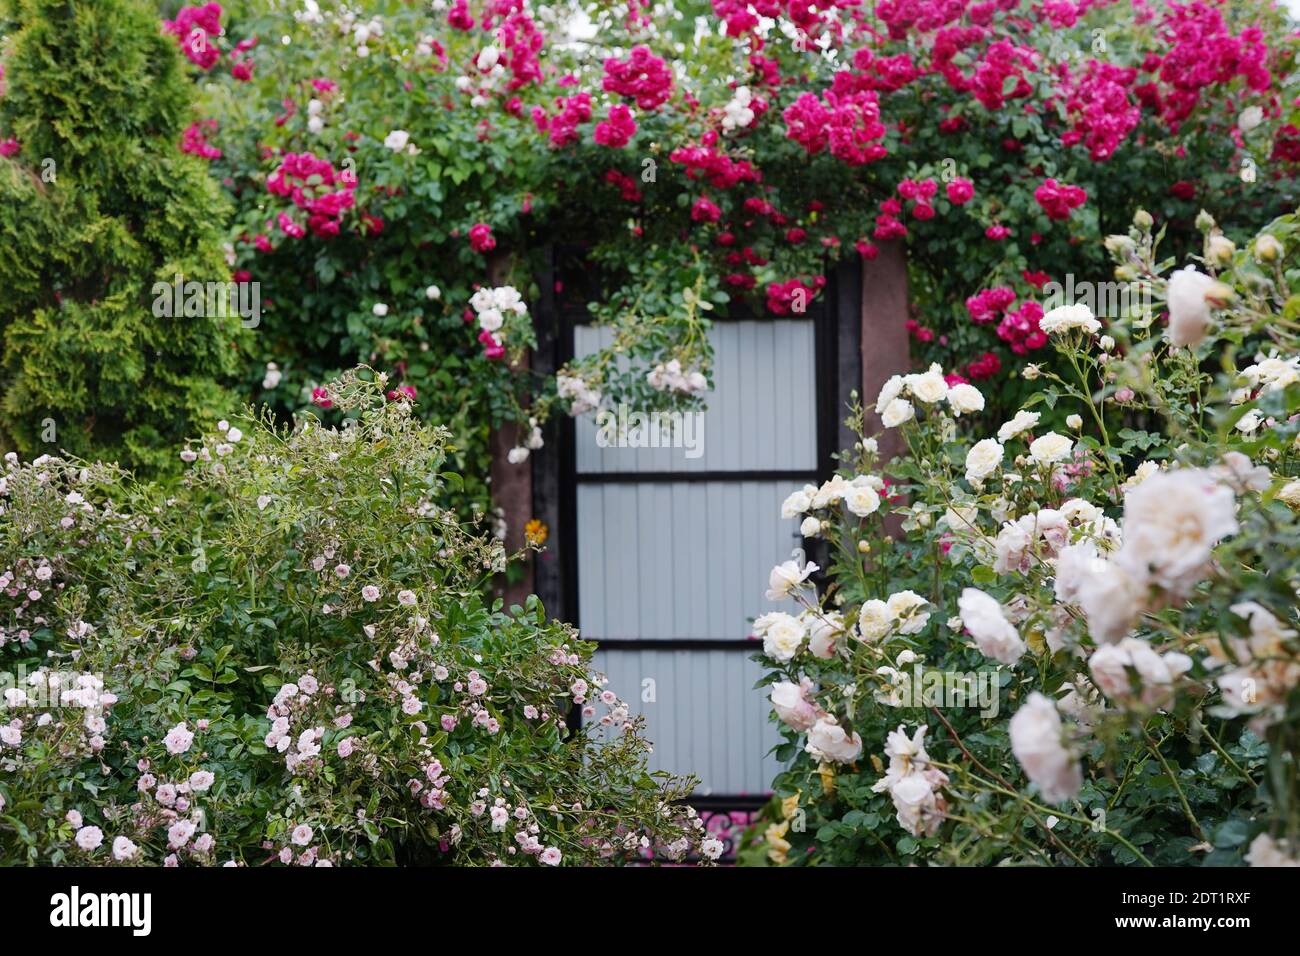 Pink, red and white rose plants and floral decorations around the house Stock Photo